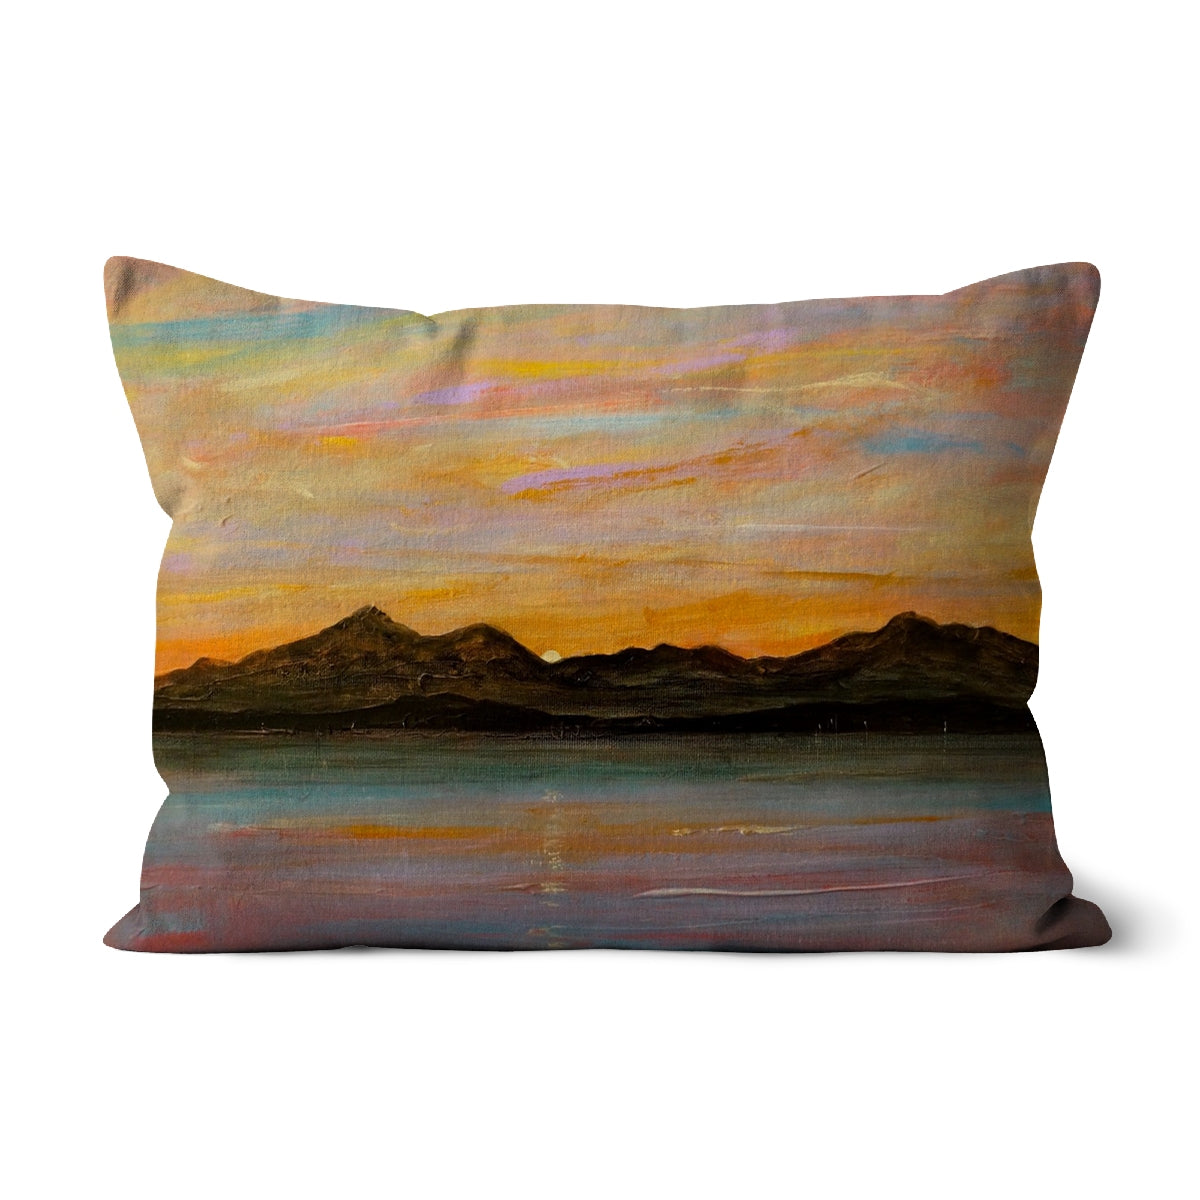 The Sleeping Warrior Arran Art Gifts Cushion-Cushions-Arran Art Gallery-Faux Suede-19"x13"-Paintings, Prints, Homeware, Art Gifts From Scotland By Scottish Artist Kevin Hunter